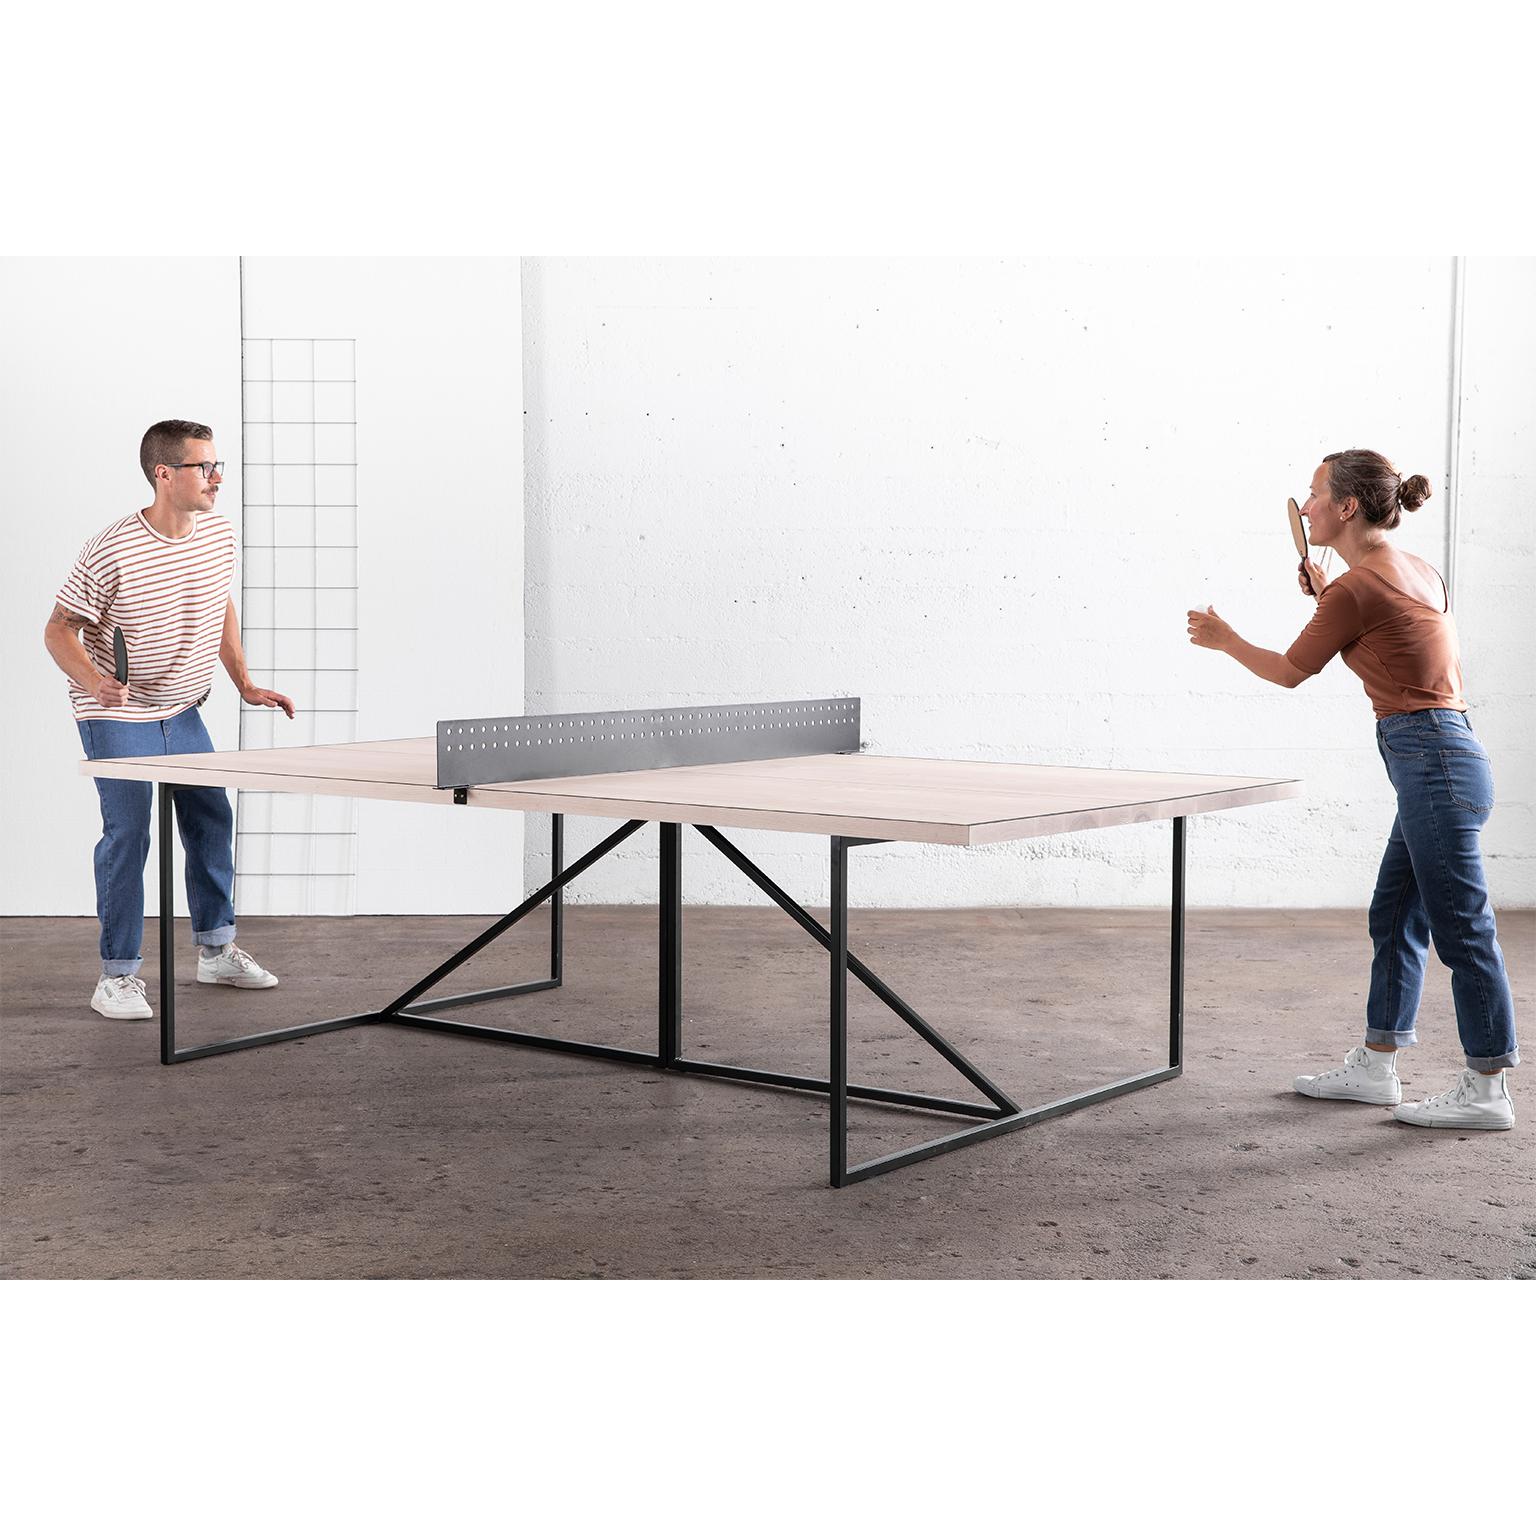 The Break Ping Pong Table gives a modern look to the classic parlour game.

The frame of the table is hand-welded from durable steel and can be finished in one of our three metal options. The table is divided by a regulation-sized metal net that’s